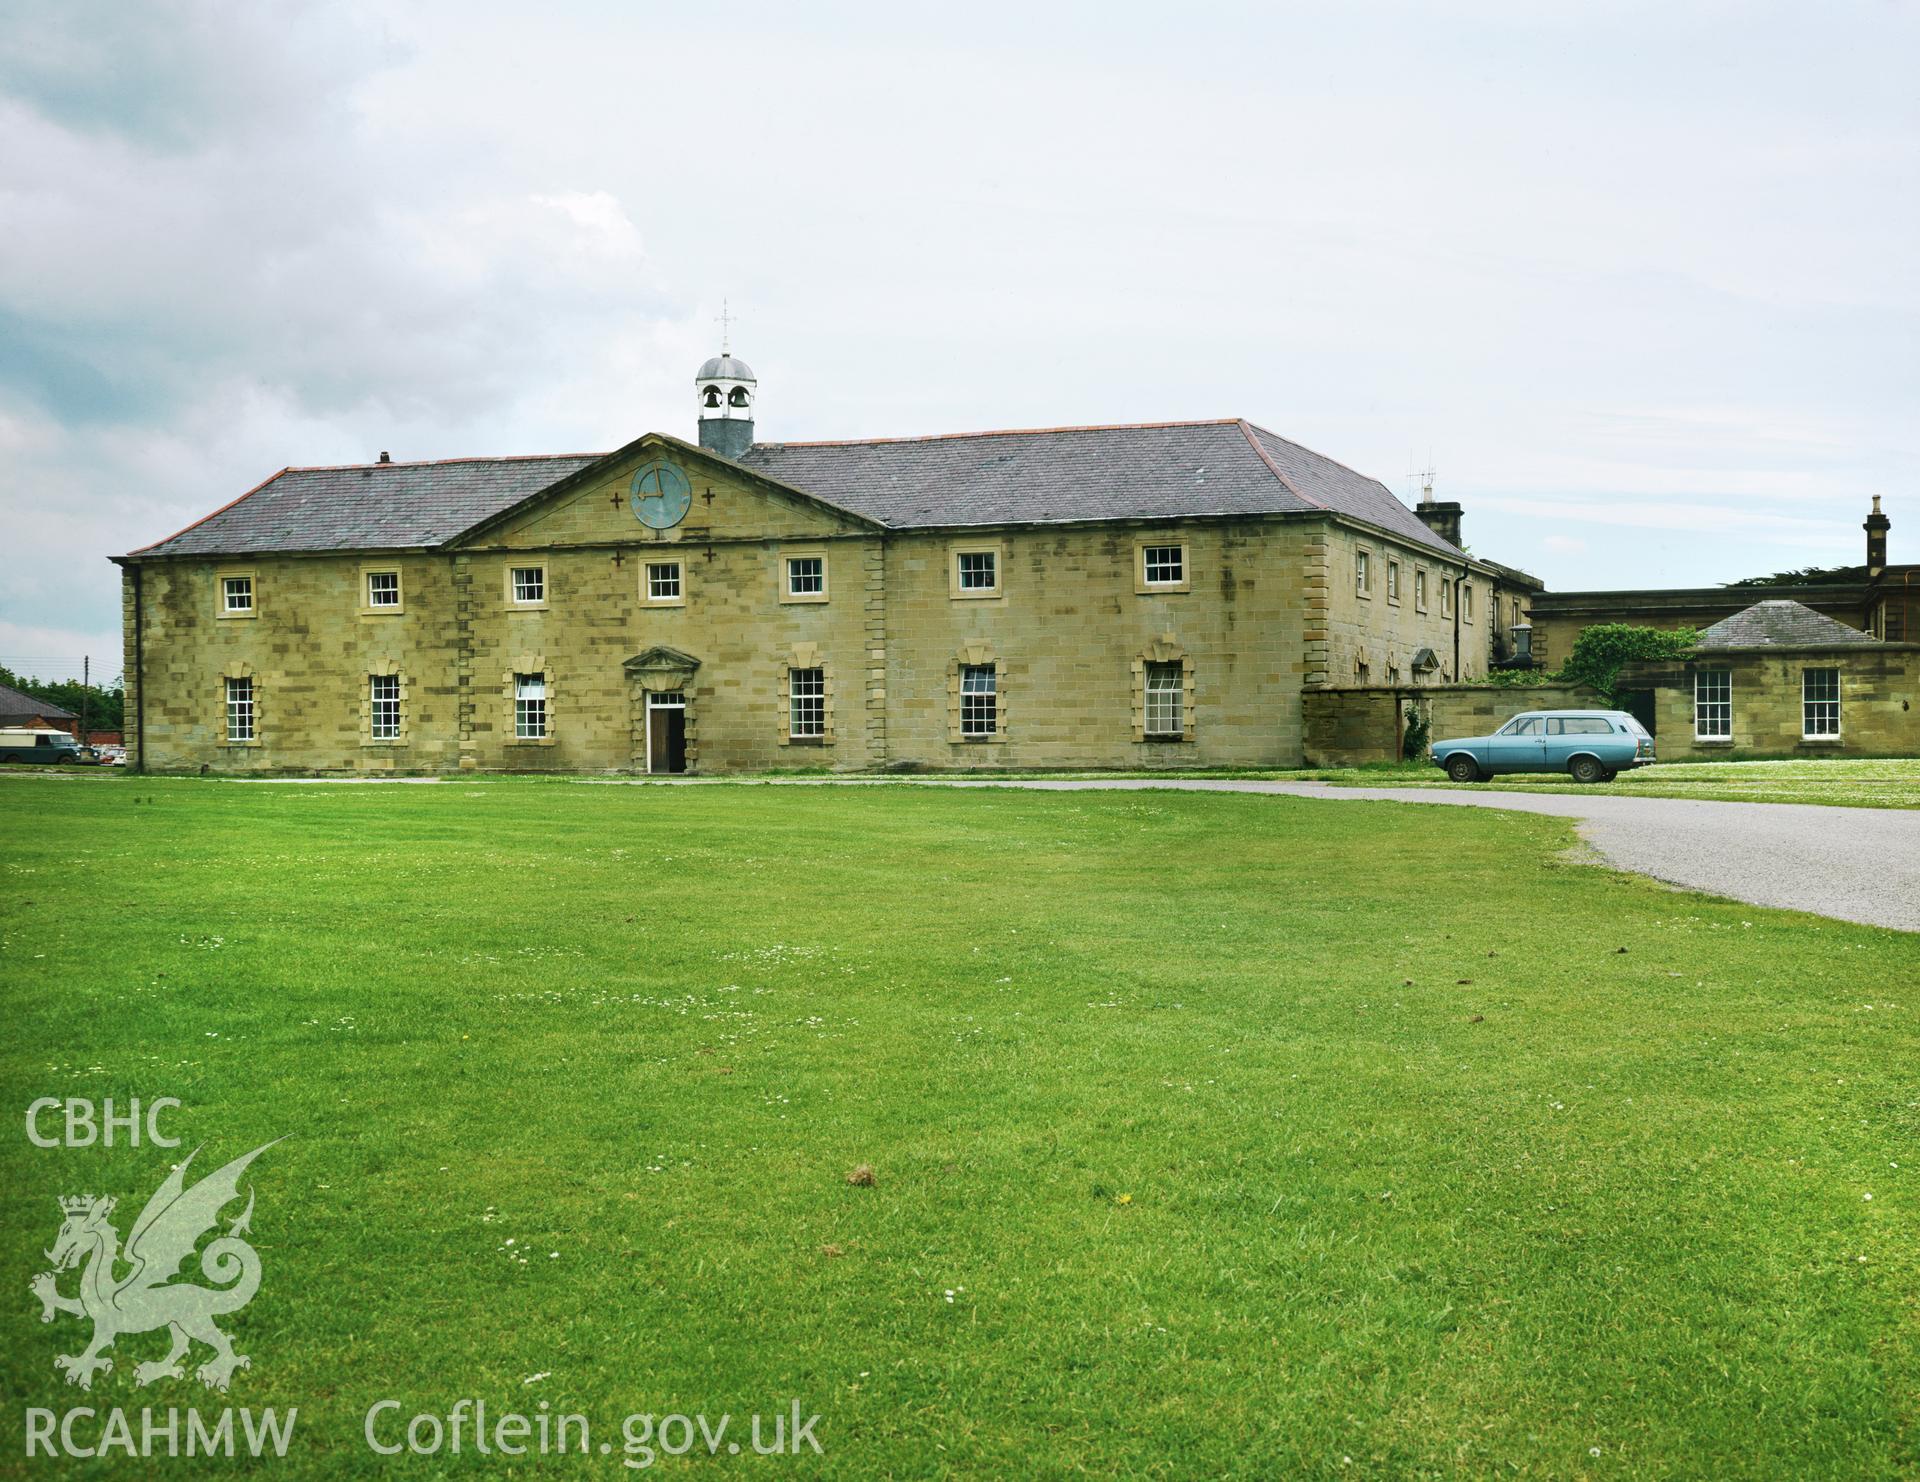 RCAHMW colour transparency showing the stables at Wynnstay Hall taken by Iain Wright, 1979.